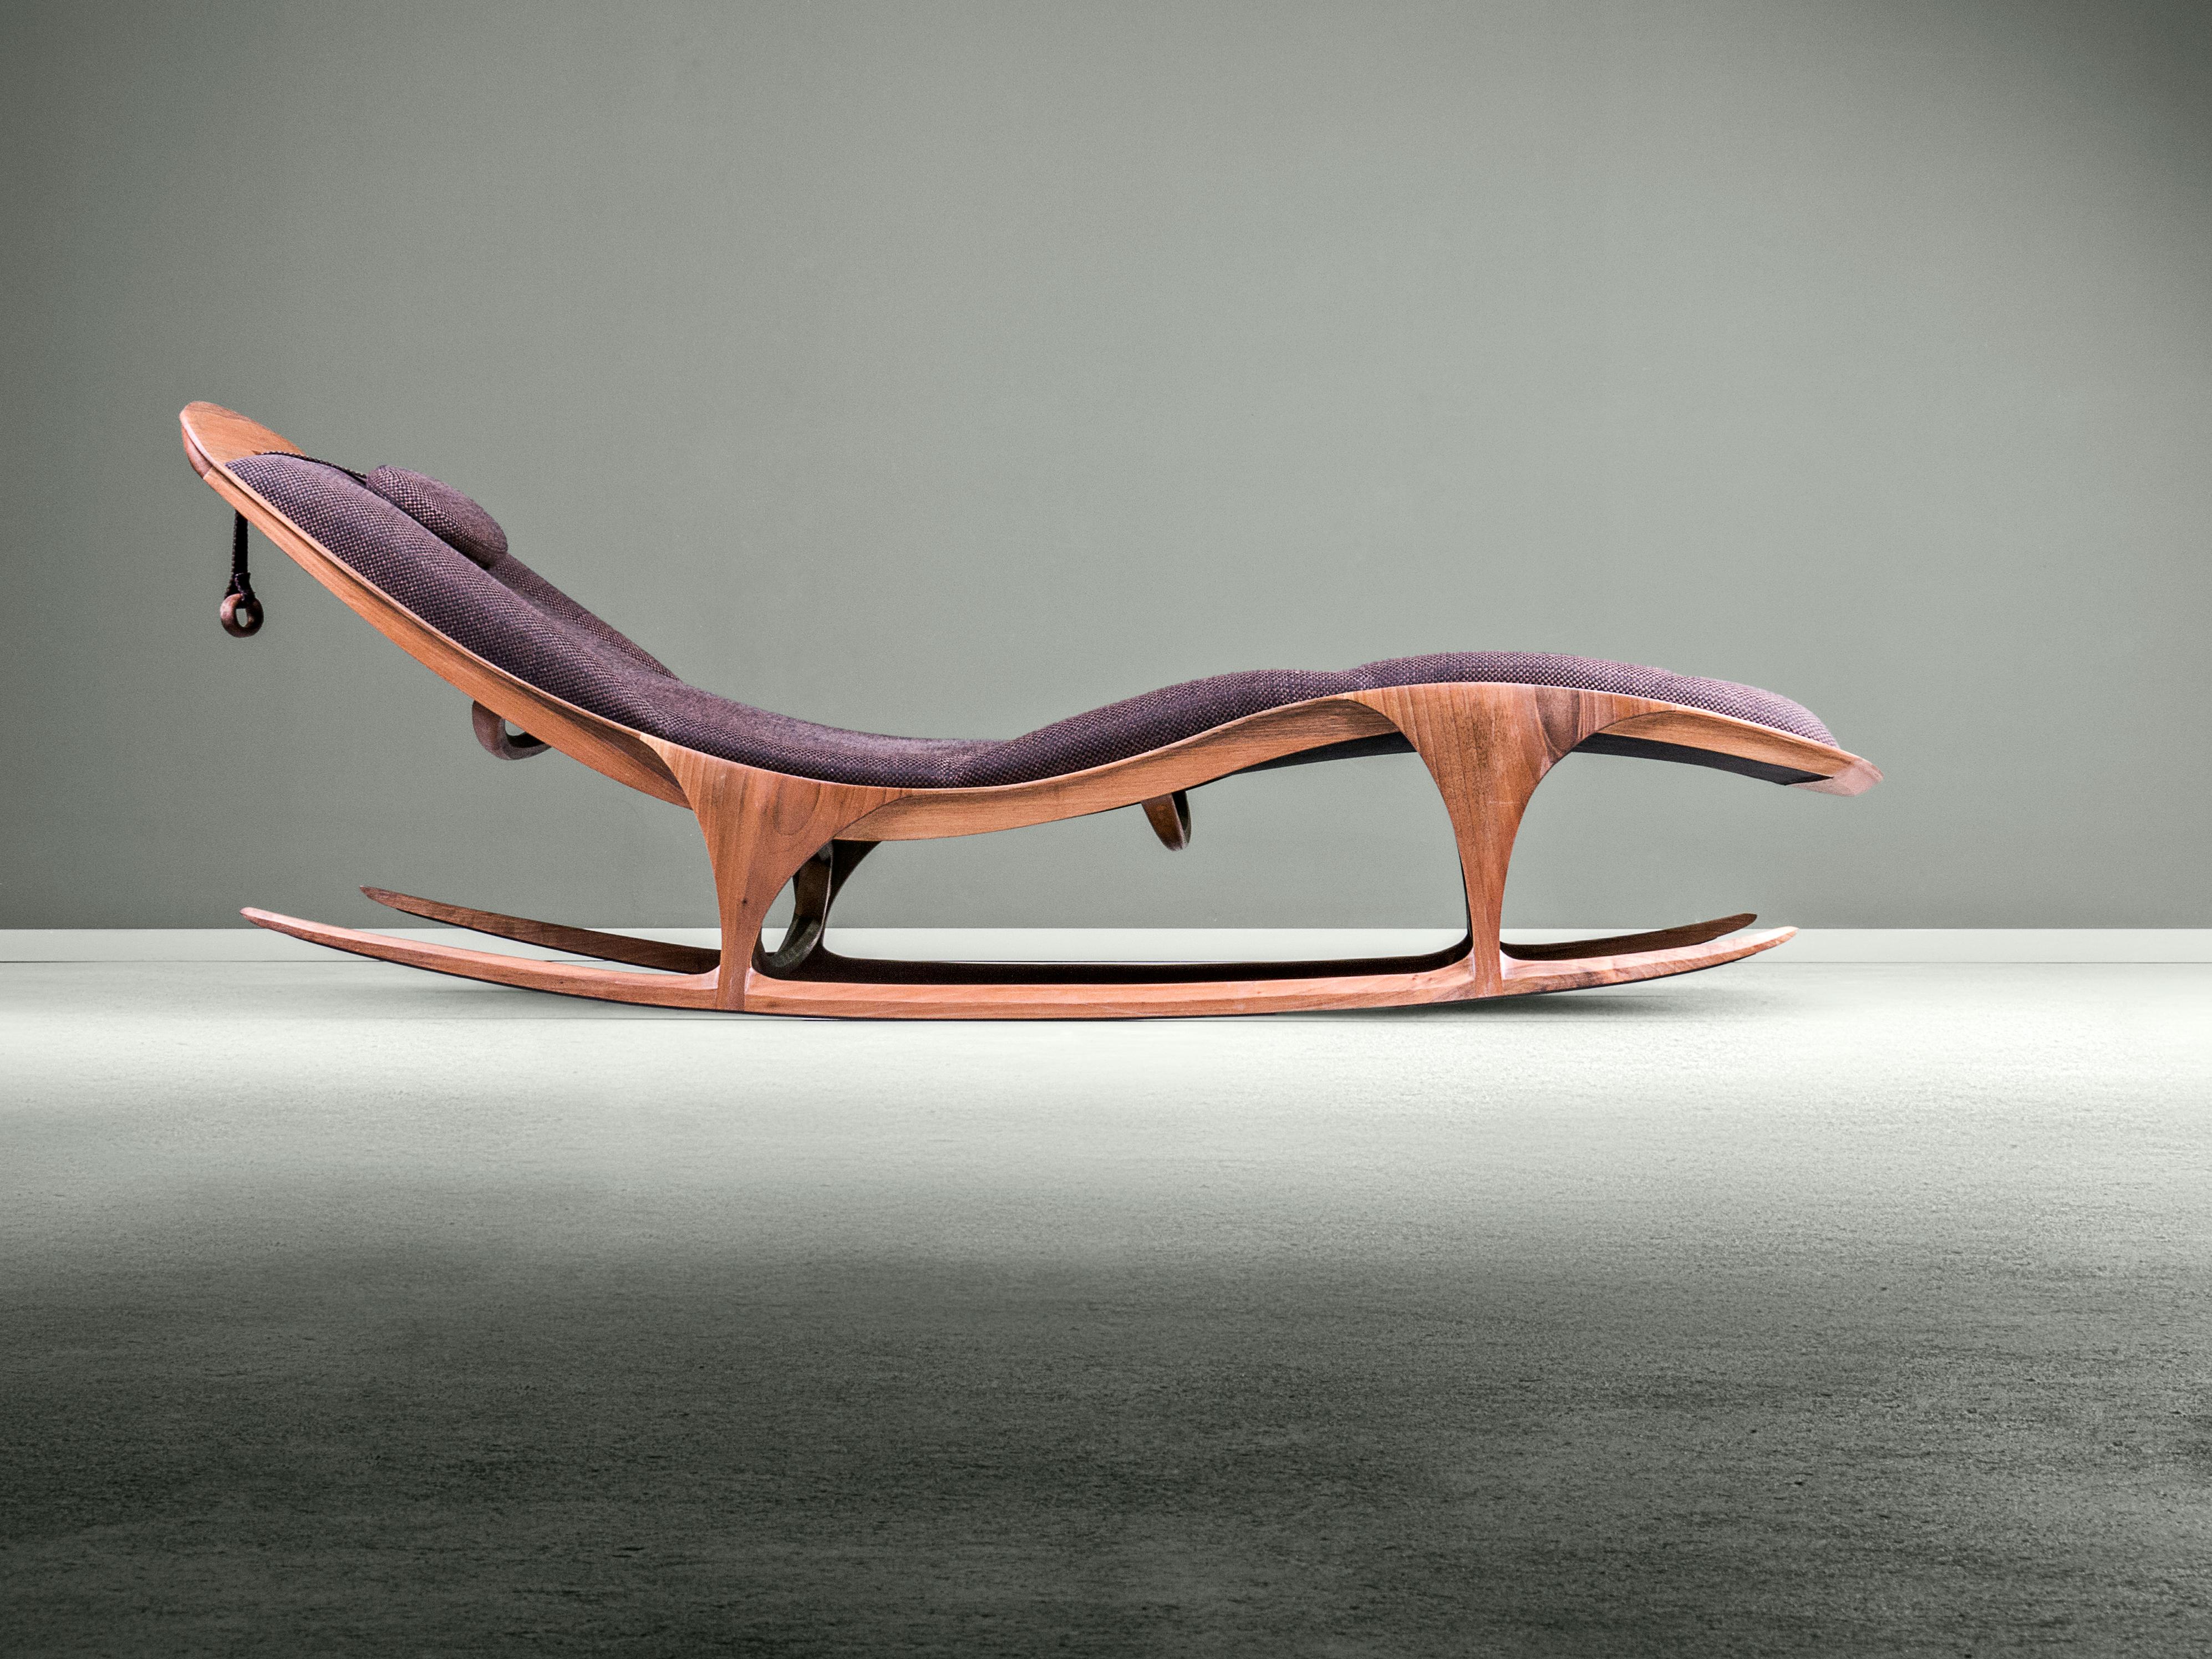 Author inspiration for this piece of furniture is the fusion of the design of the Nordic sleds and retro sports cars. With extremely sculptural character this piece exudes the impression of power, speed and aerodynamics. Characteristically